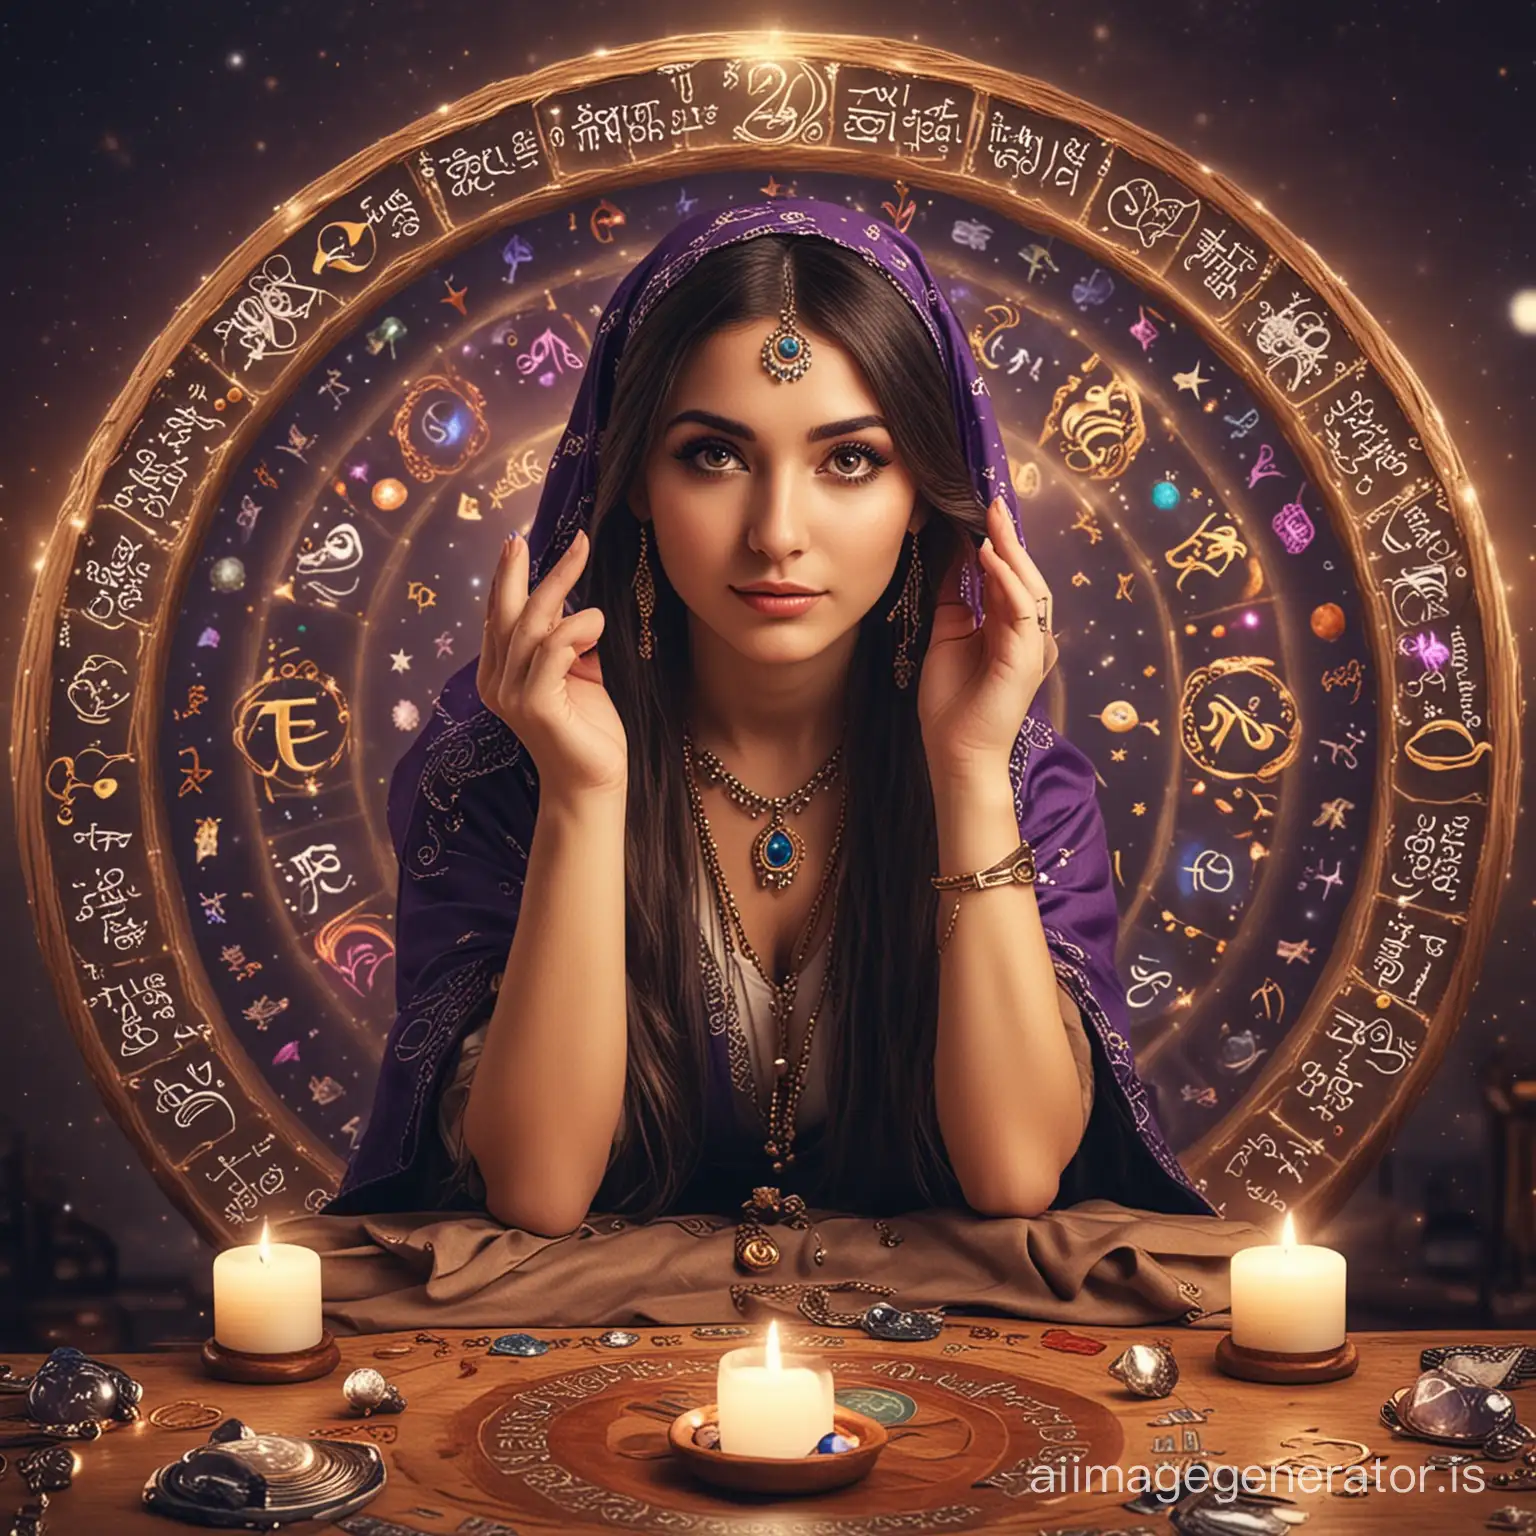 Female fortune teller, Turkish, extremely beautiful, 12 zodiac signs, future prediction, daily horoscope